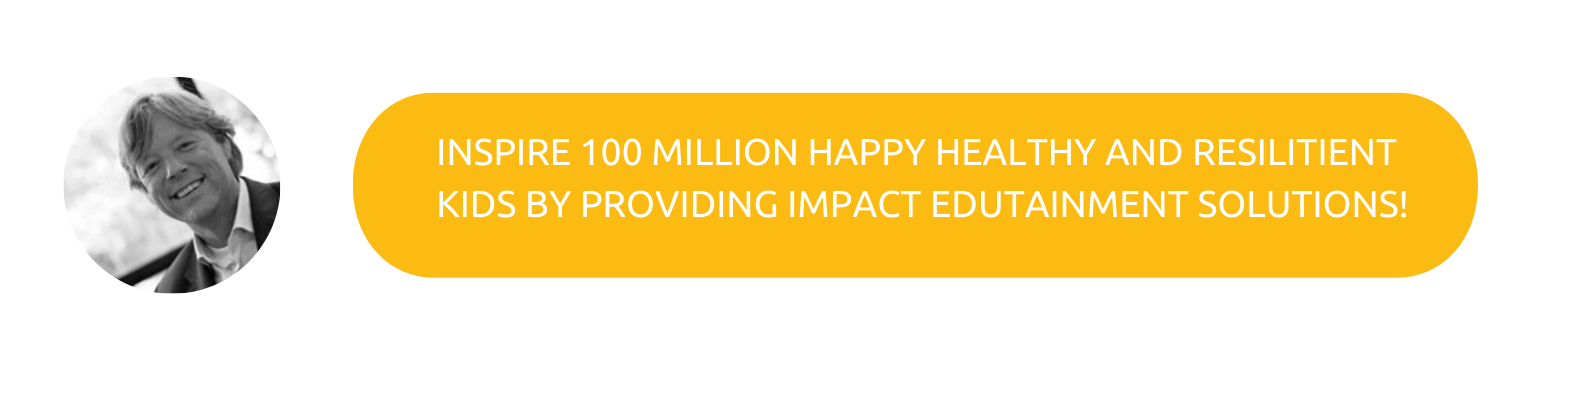 INSPIRE 100 MILLION HAPPY HEALTHY AND RESILITIENT KIDS BY PROVIDING IMPACT EDUTAINMENT SOLUTIONS!